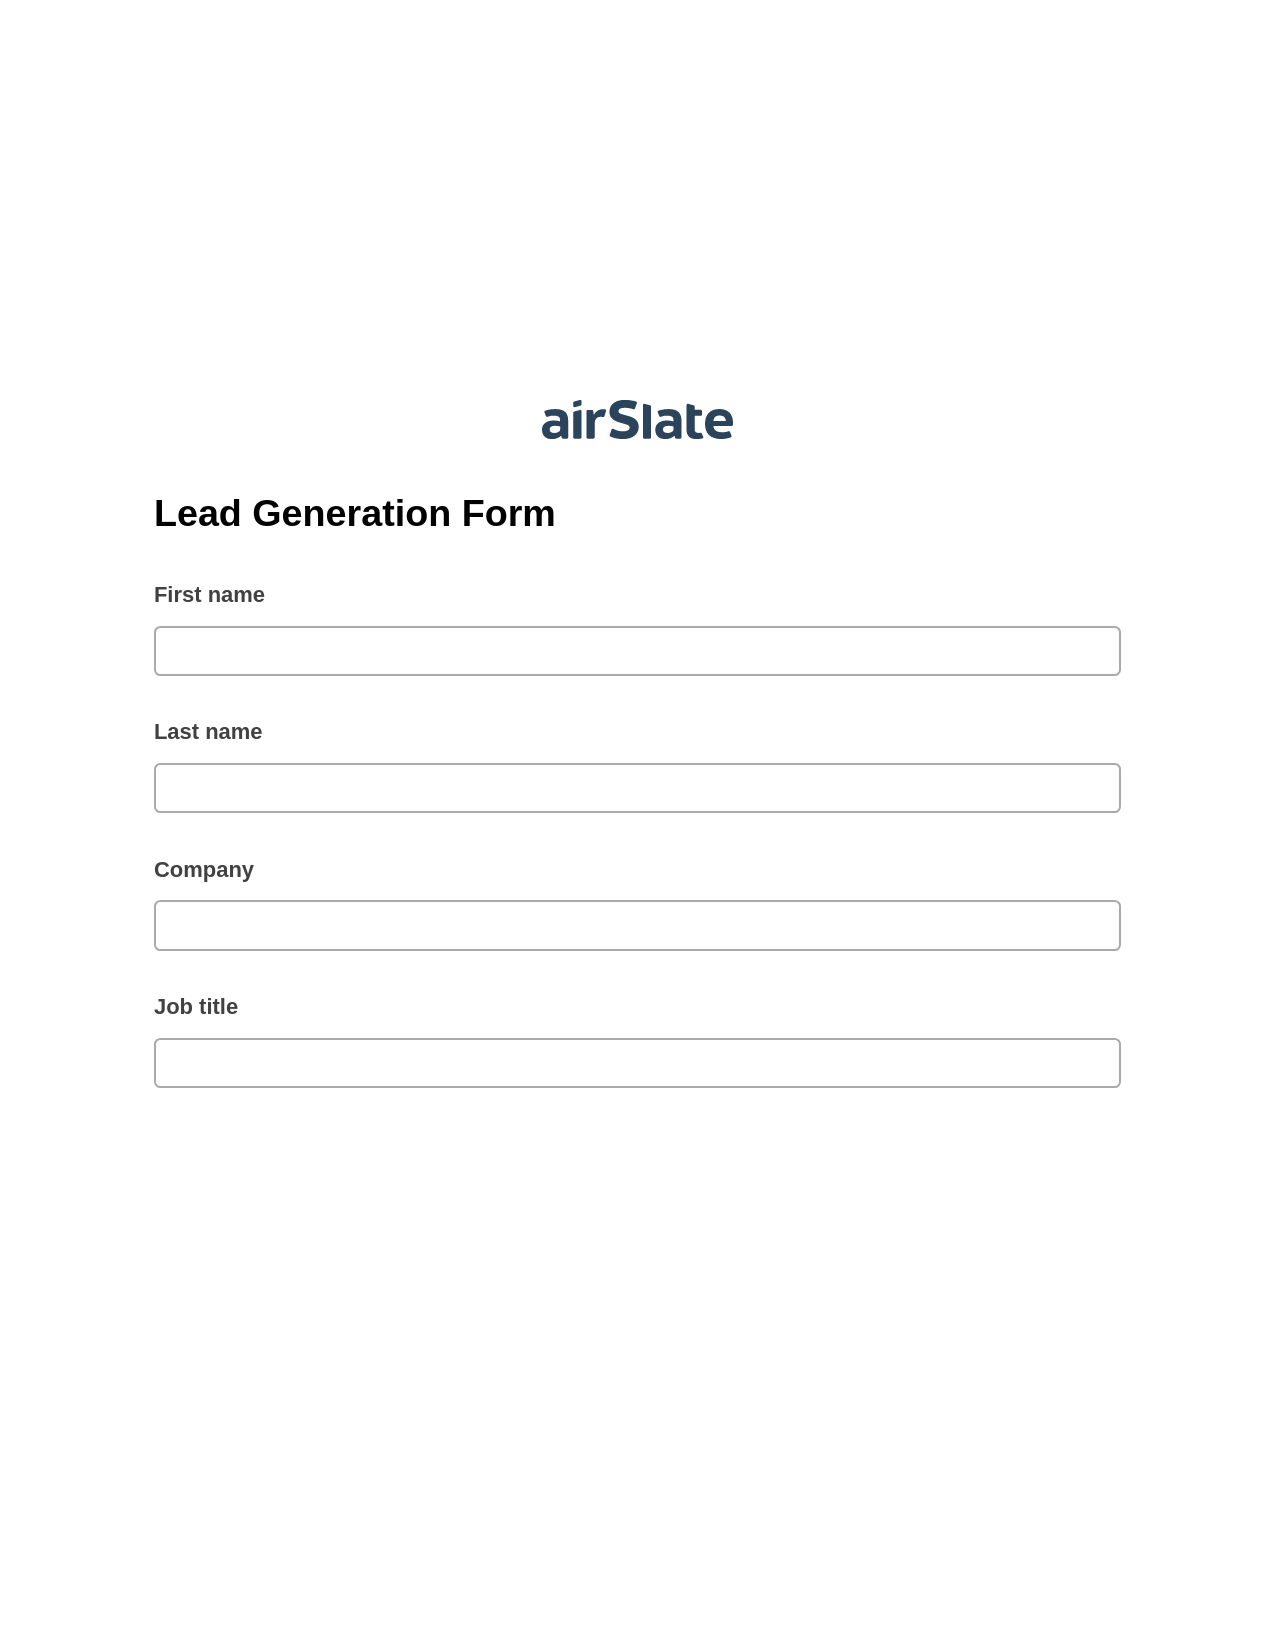 Lead Generation Form Pre-fill from MySQL Bot, Send a Slate with Roles Bot, Archive to OneDrive Bot